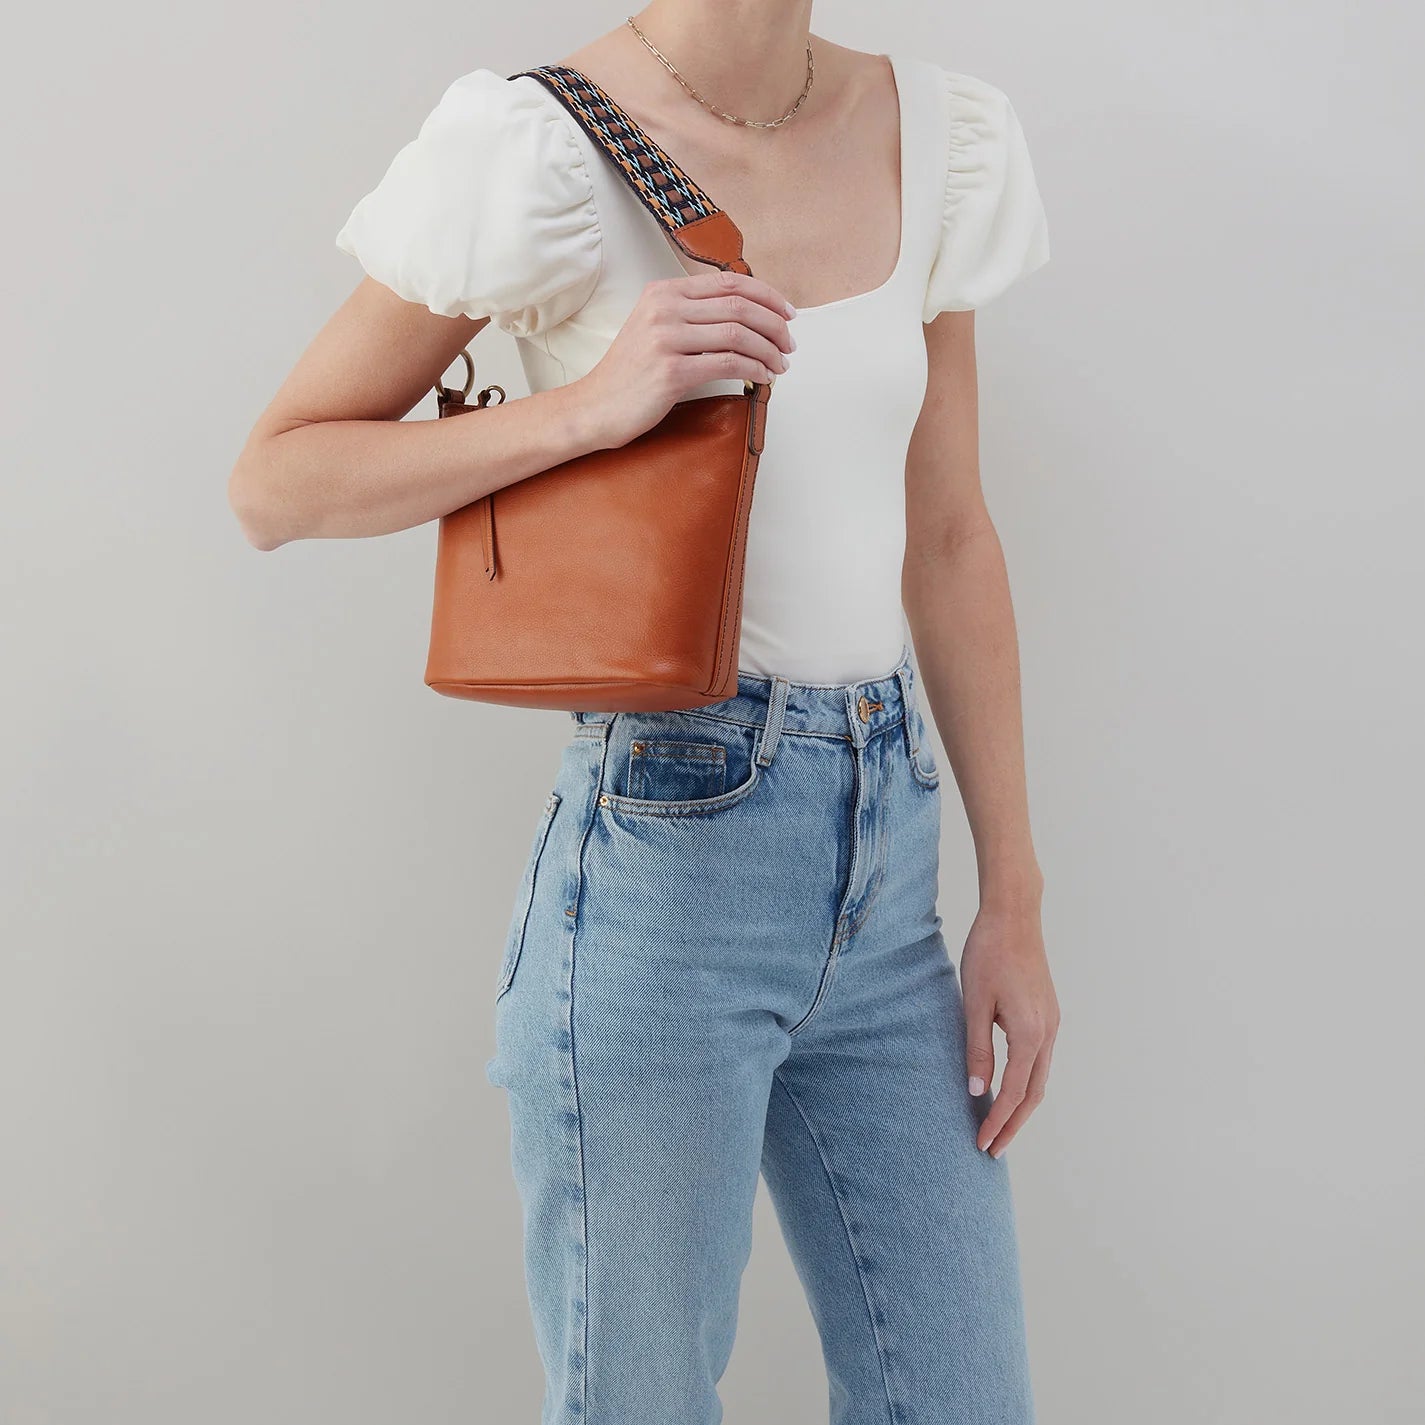 person wearing jeans and a white top with honey brown bell shoulder bag on their shoulder.